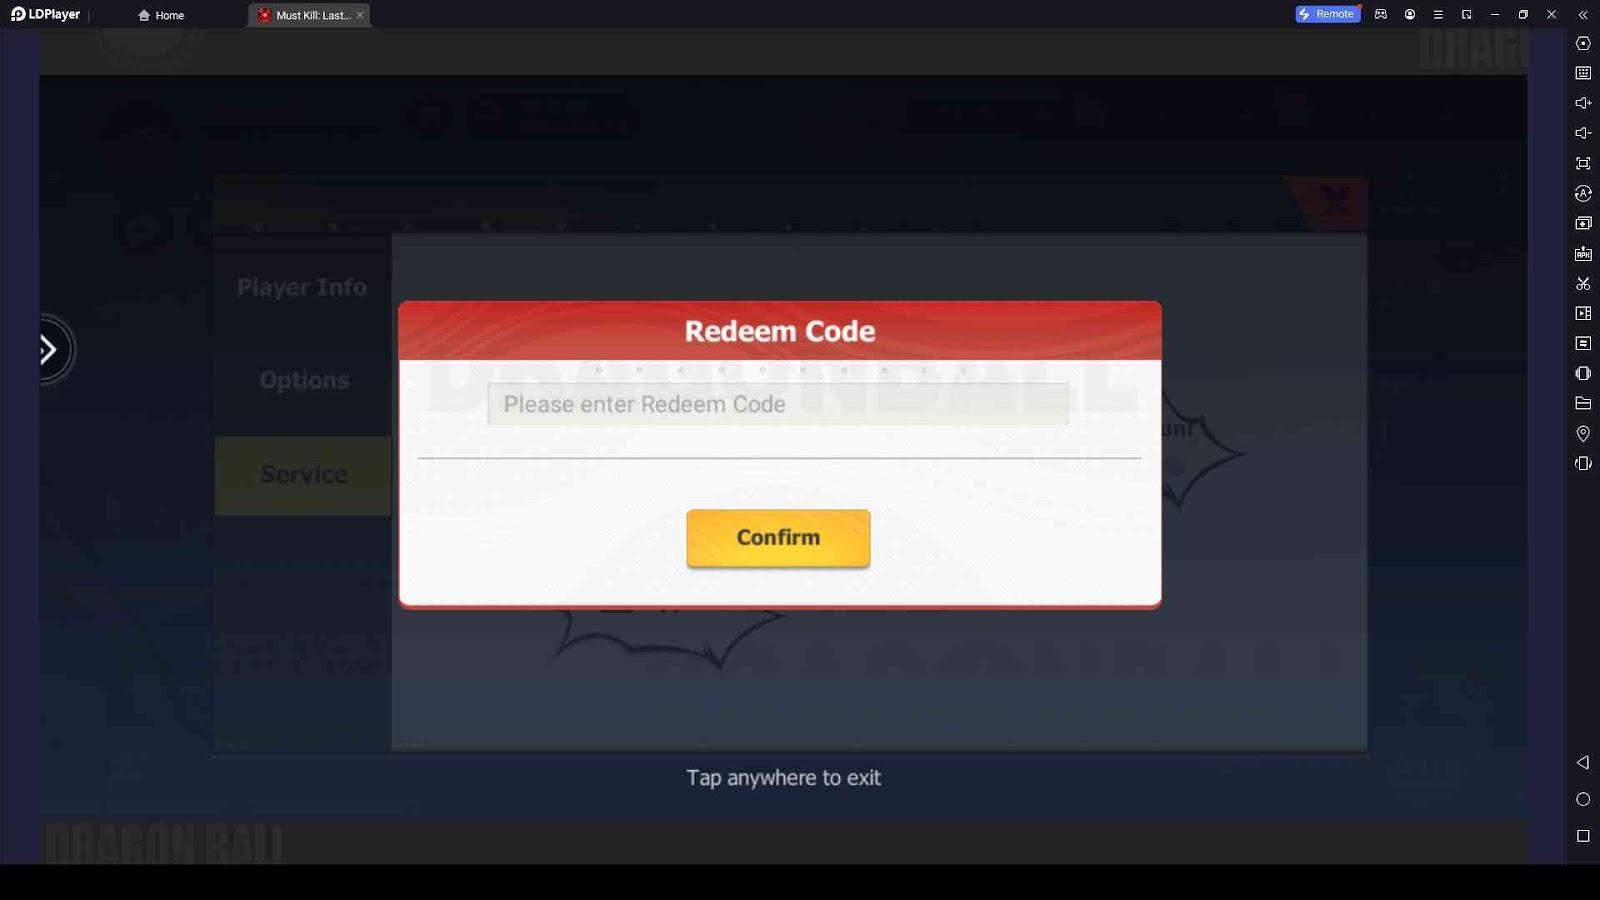 Redeeming Process for the Codes in Must Kill: Last Strike